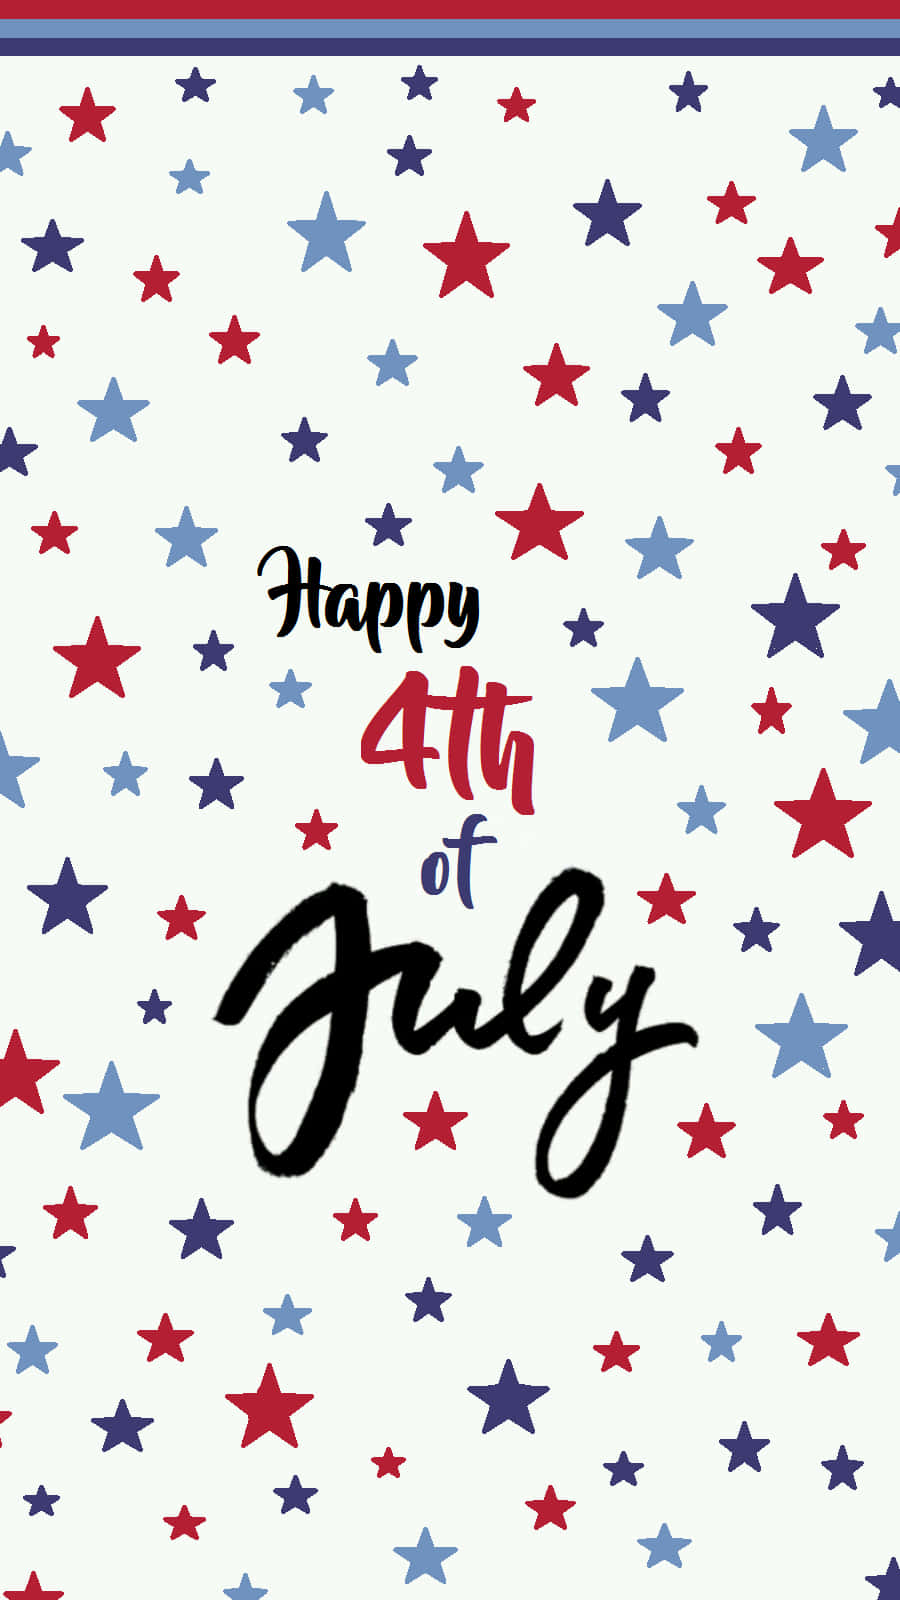 Make this 4th of July extra special by decorating with this fun, cute background!